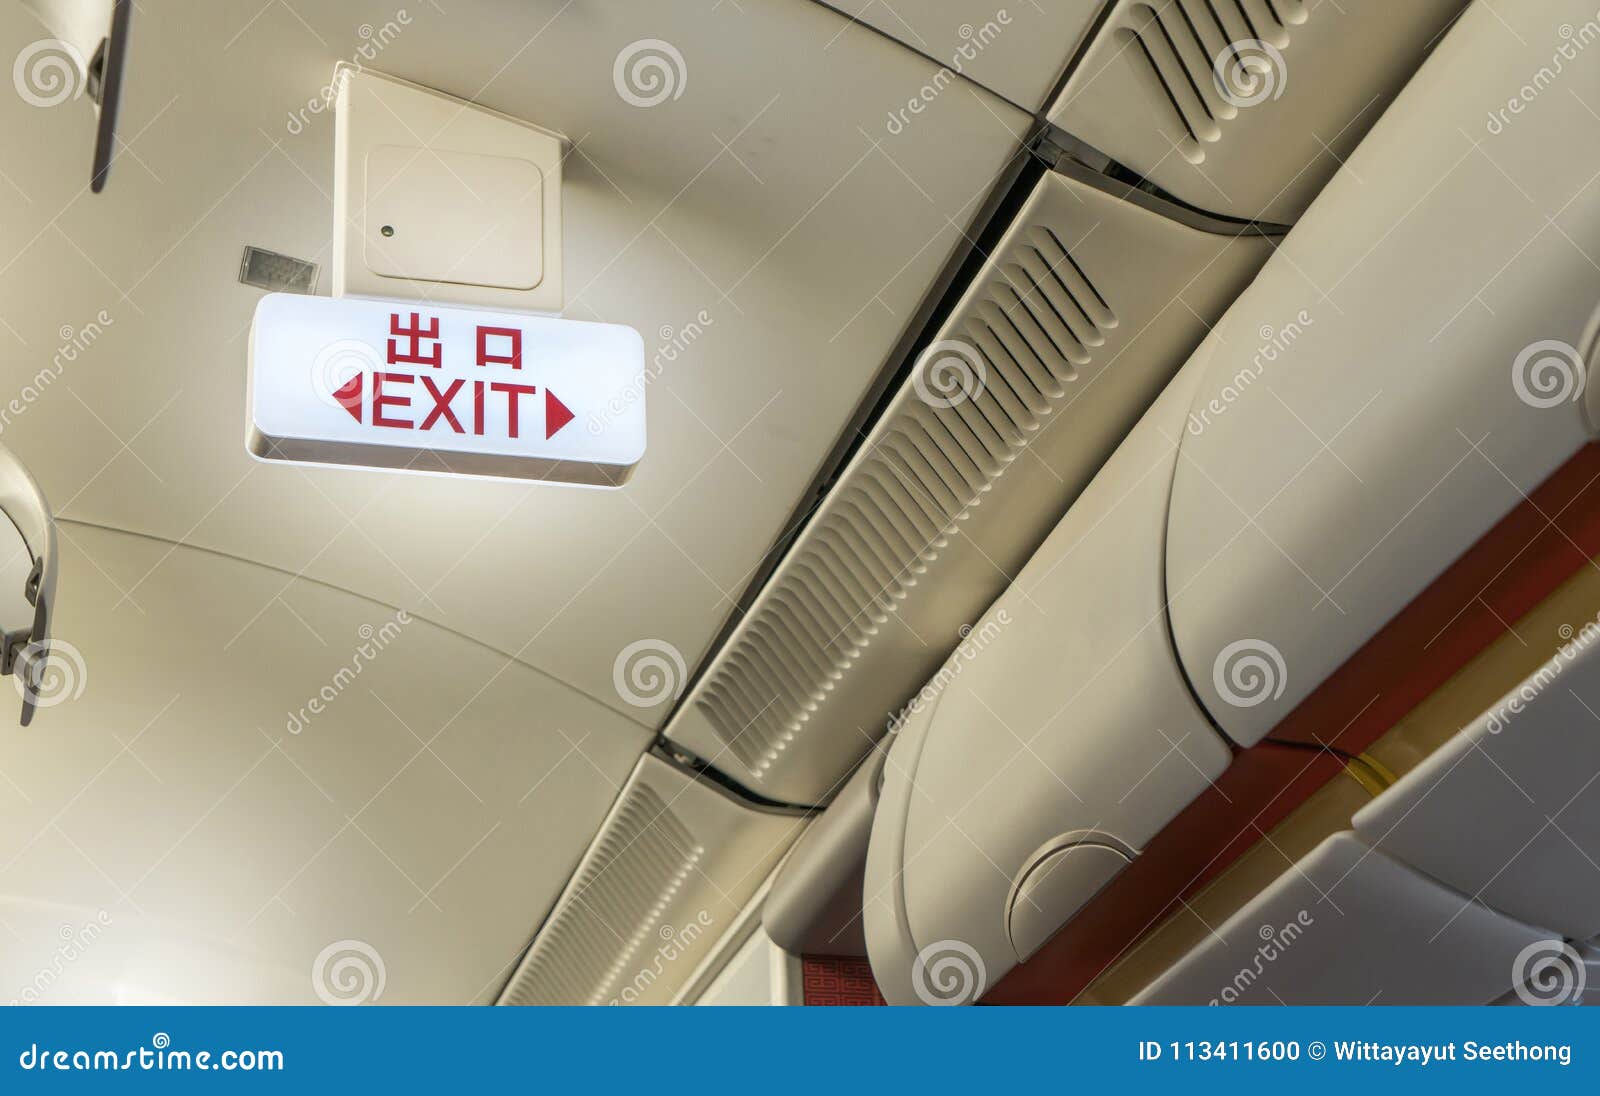 Close Up Of Light Board Emergency Exit Way Sign On Airplane For Safety And Security Services